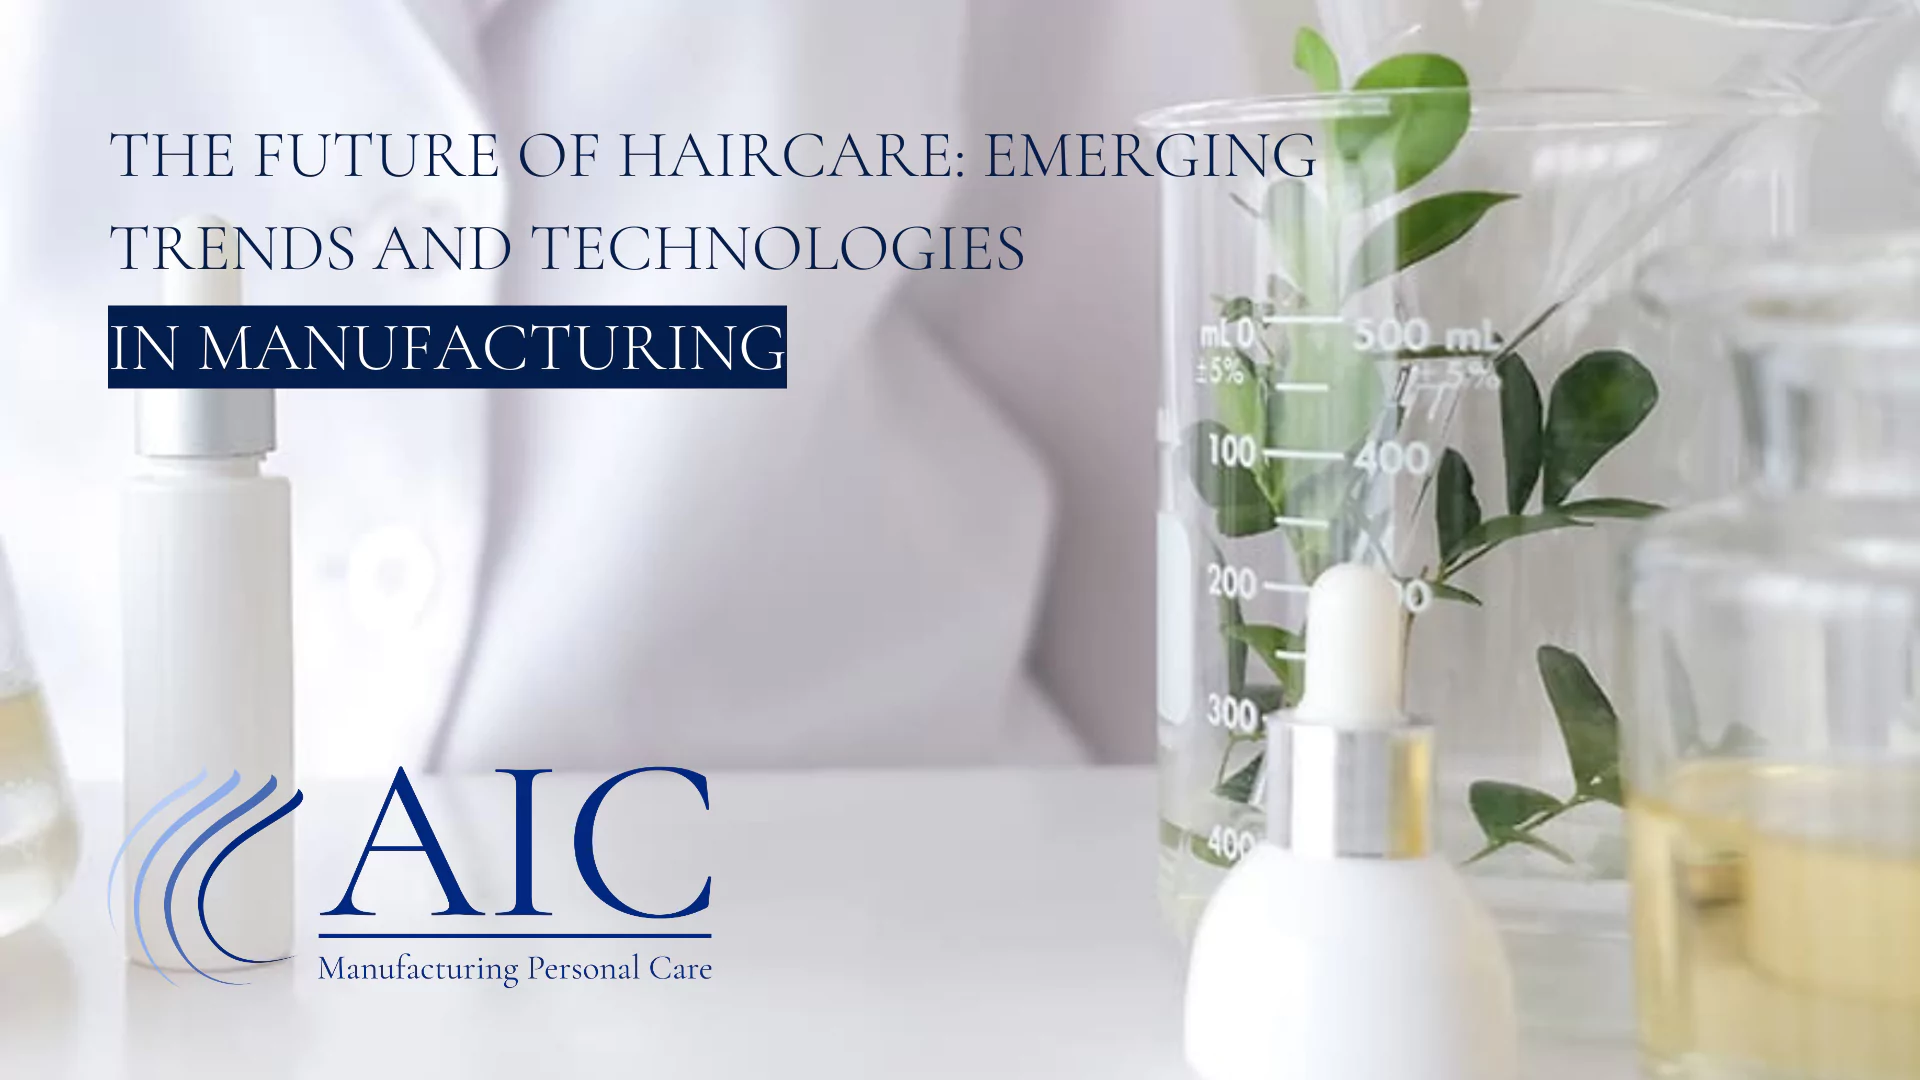 The Future of Haircare: Emerging Trends and Technologies in Manufacturing - Featured Image